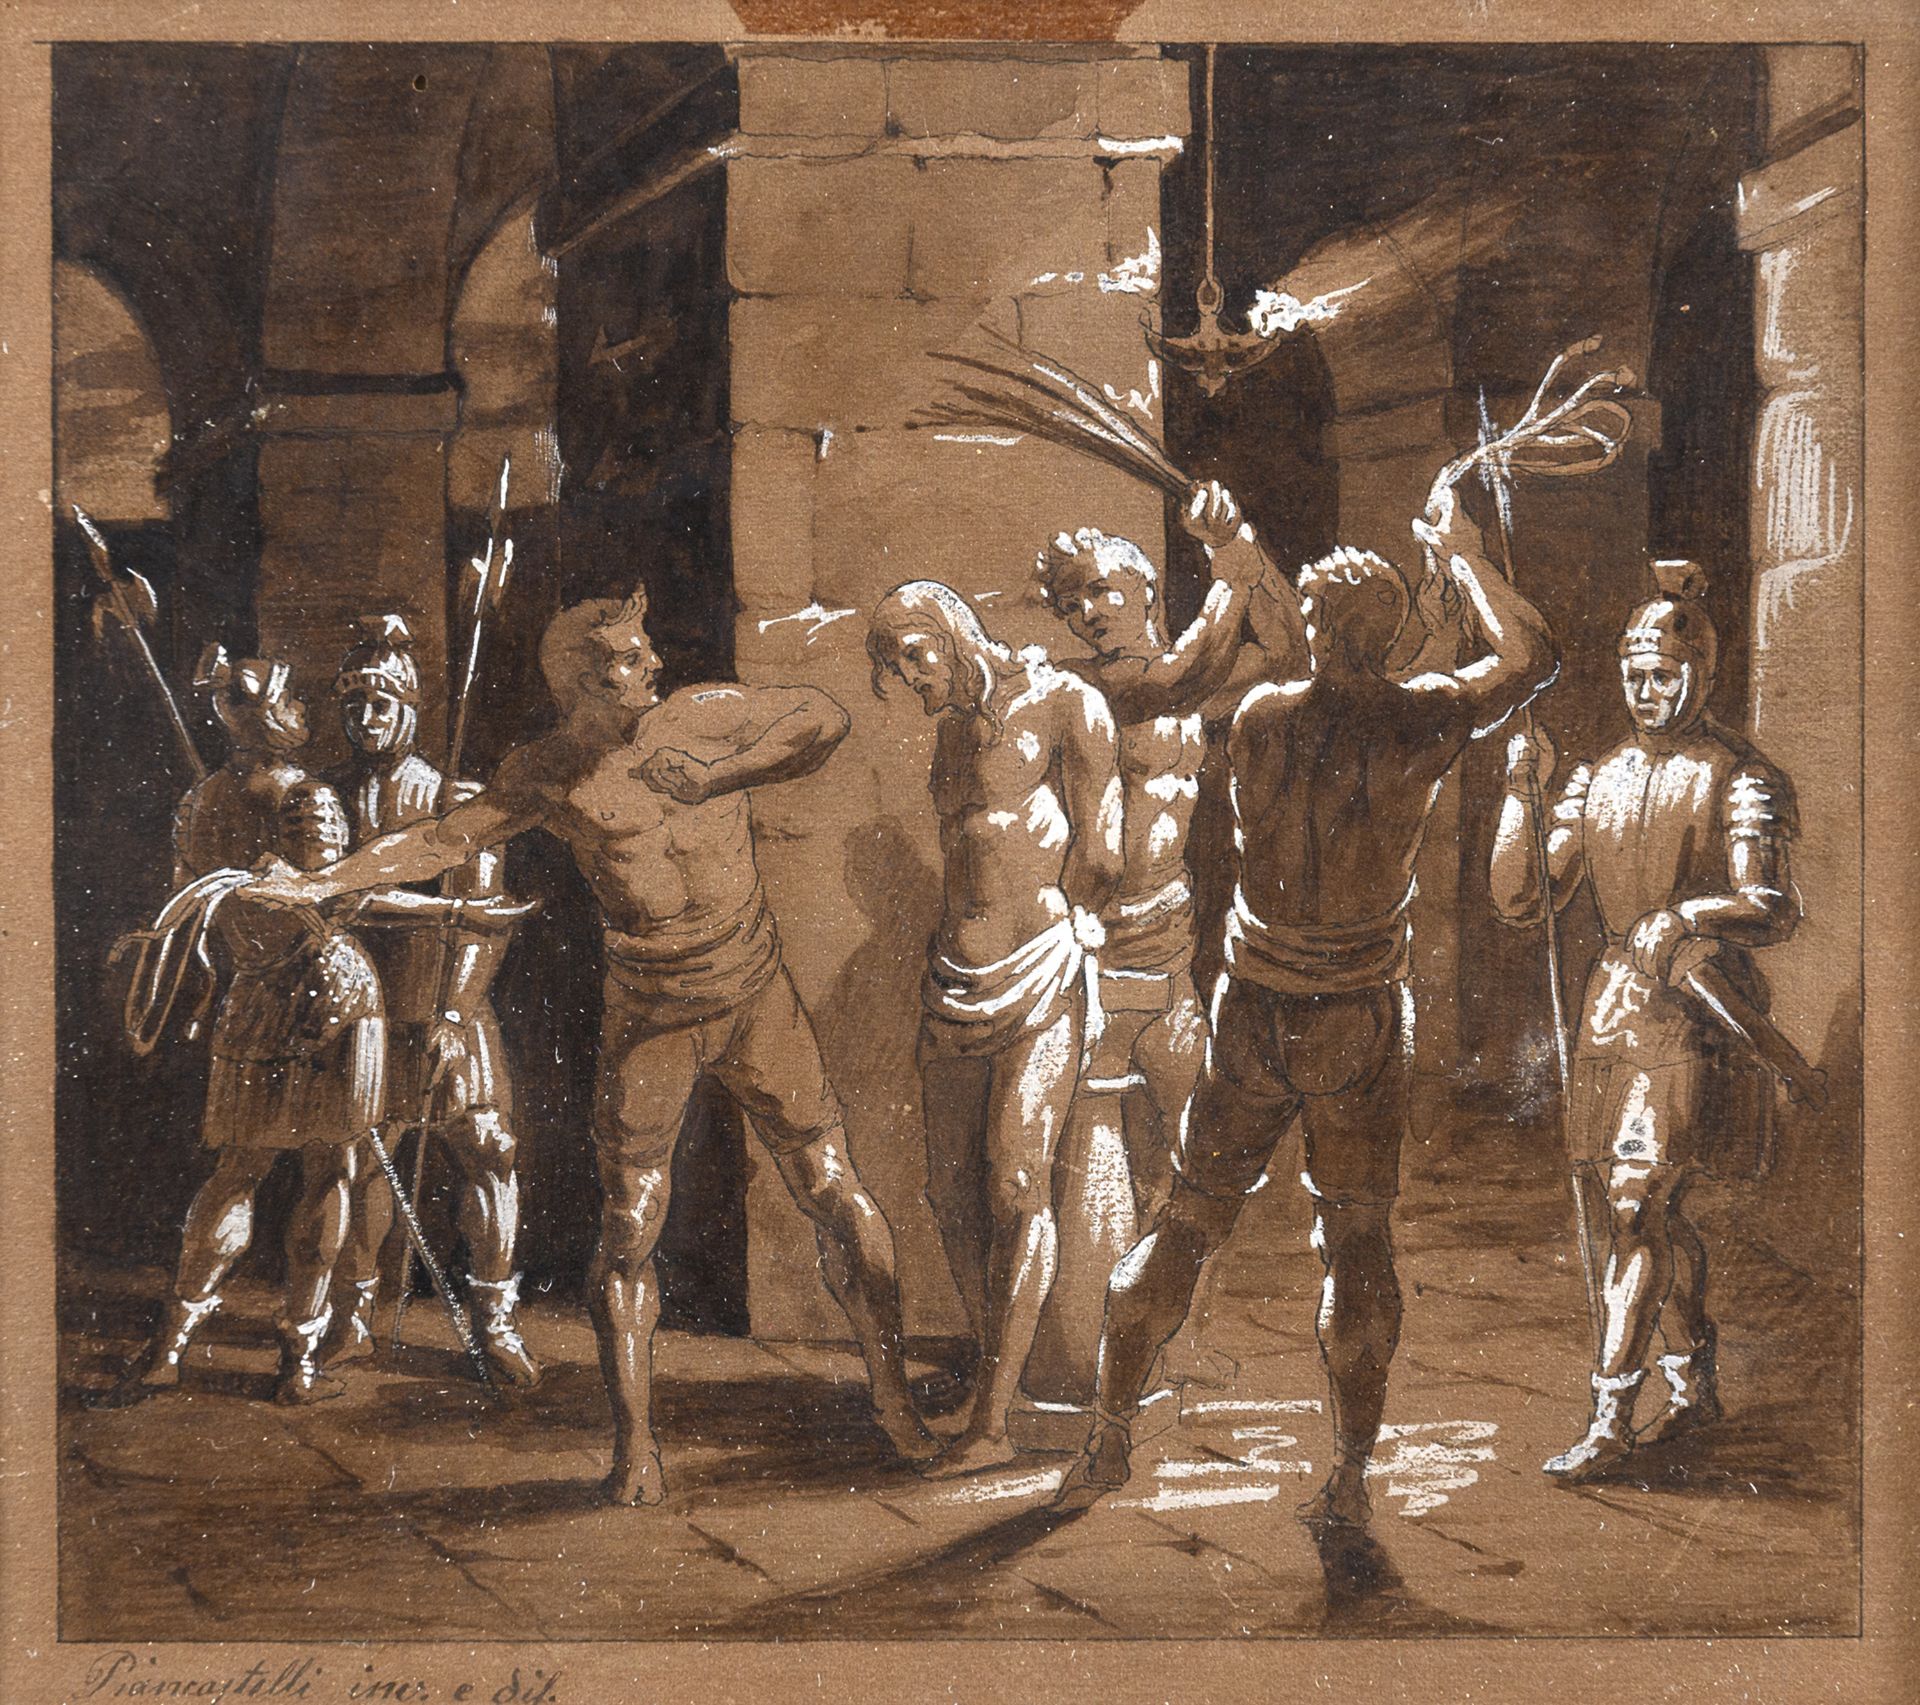 SEPIA DRAWING BY GIOVANNI PIANCASTELLI